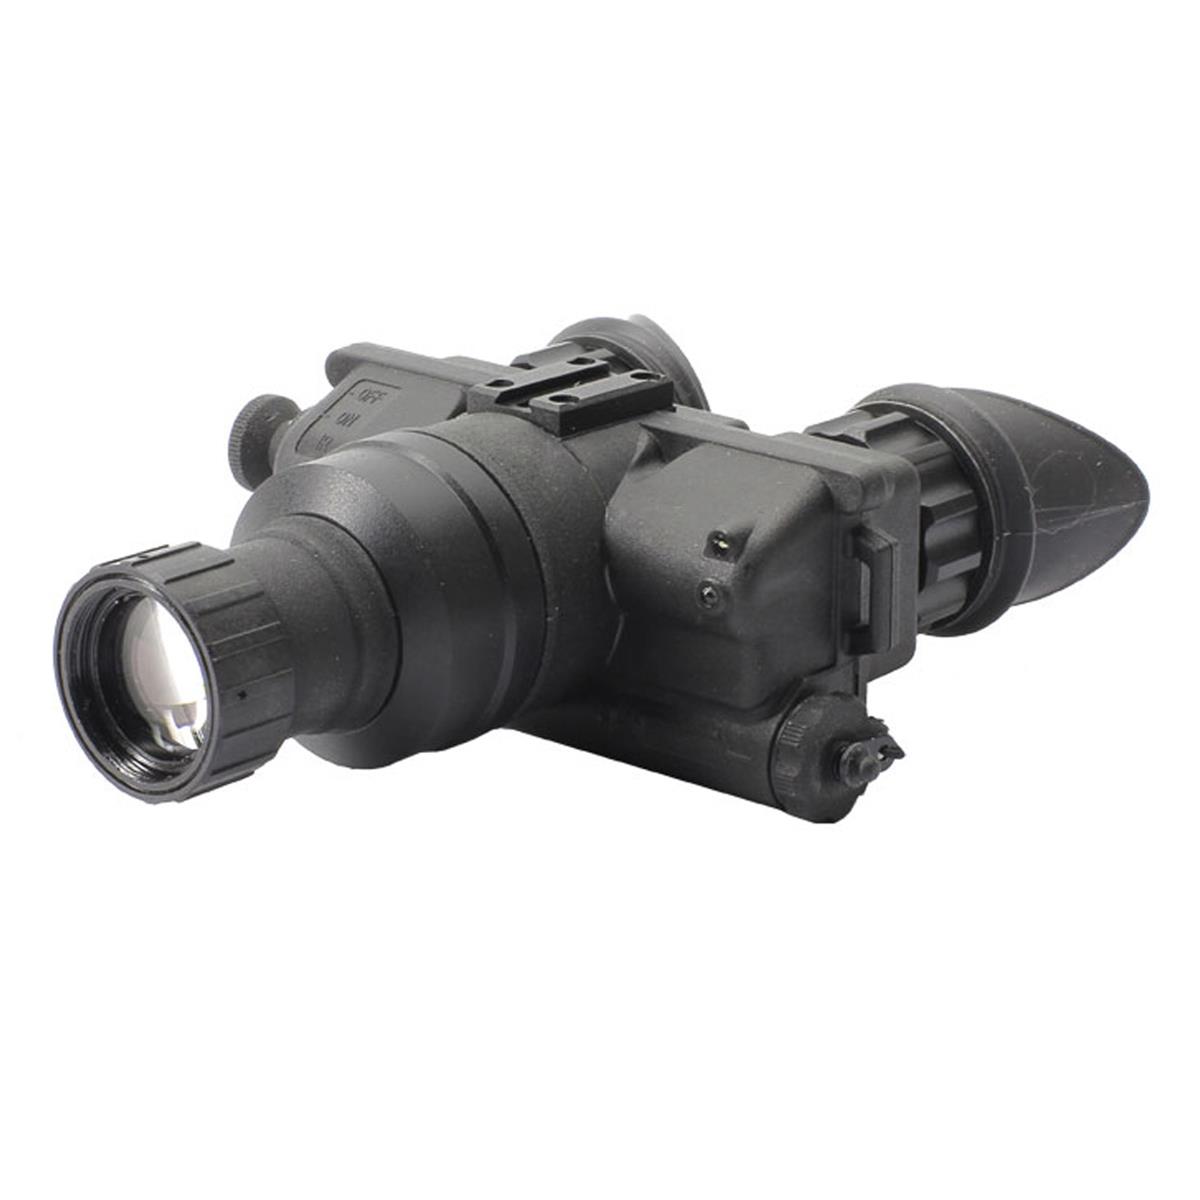 Image of Newcon Optik 1x Gen 3 Autogated Night Vision Goggles